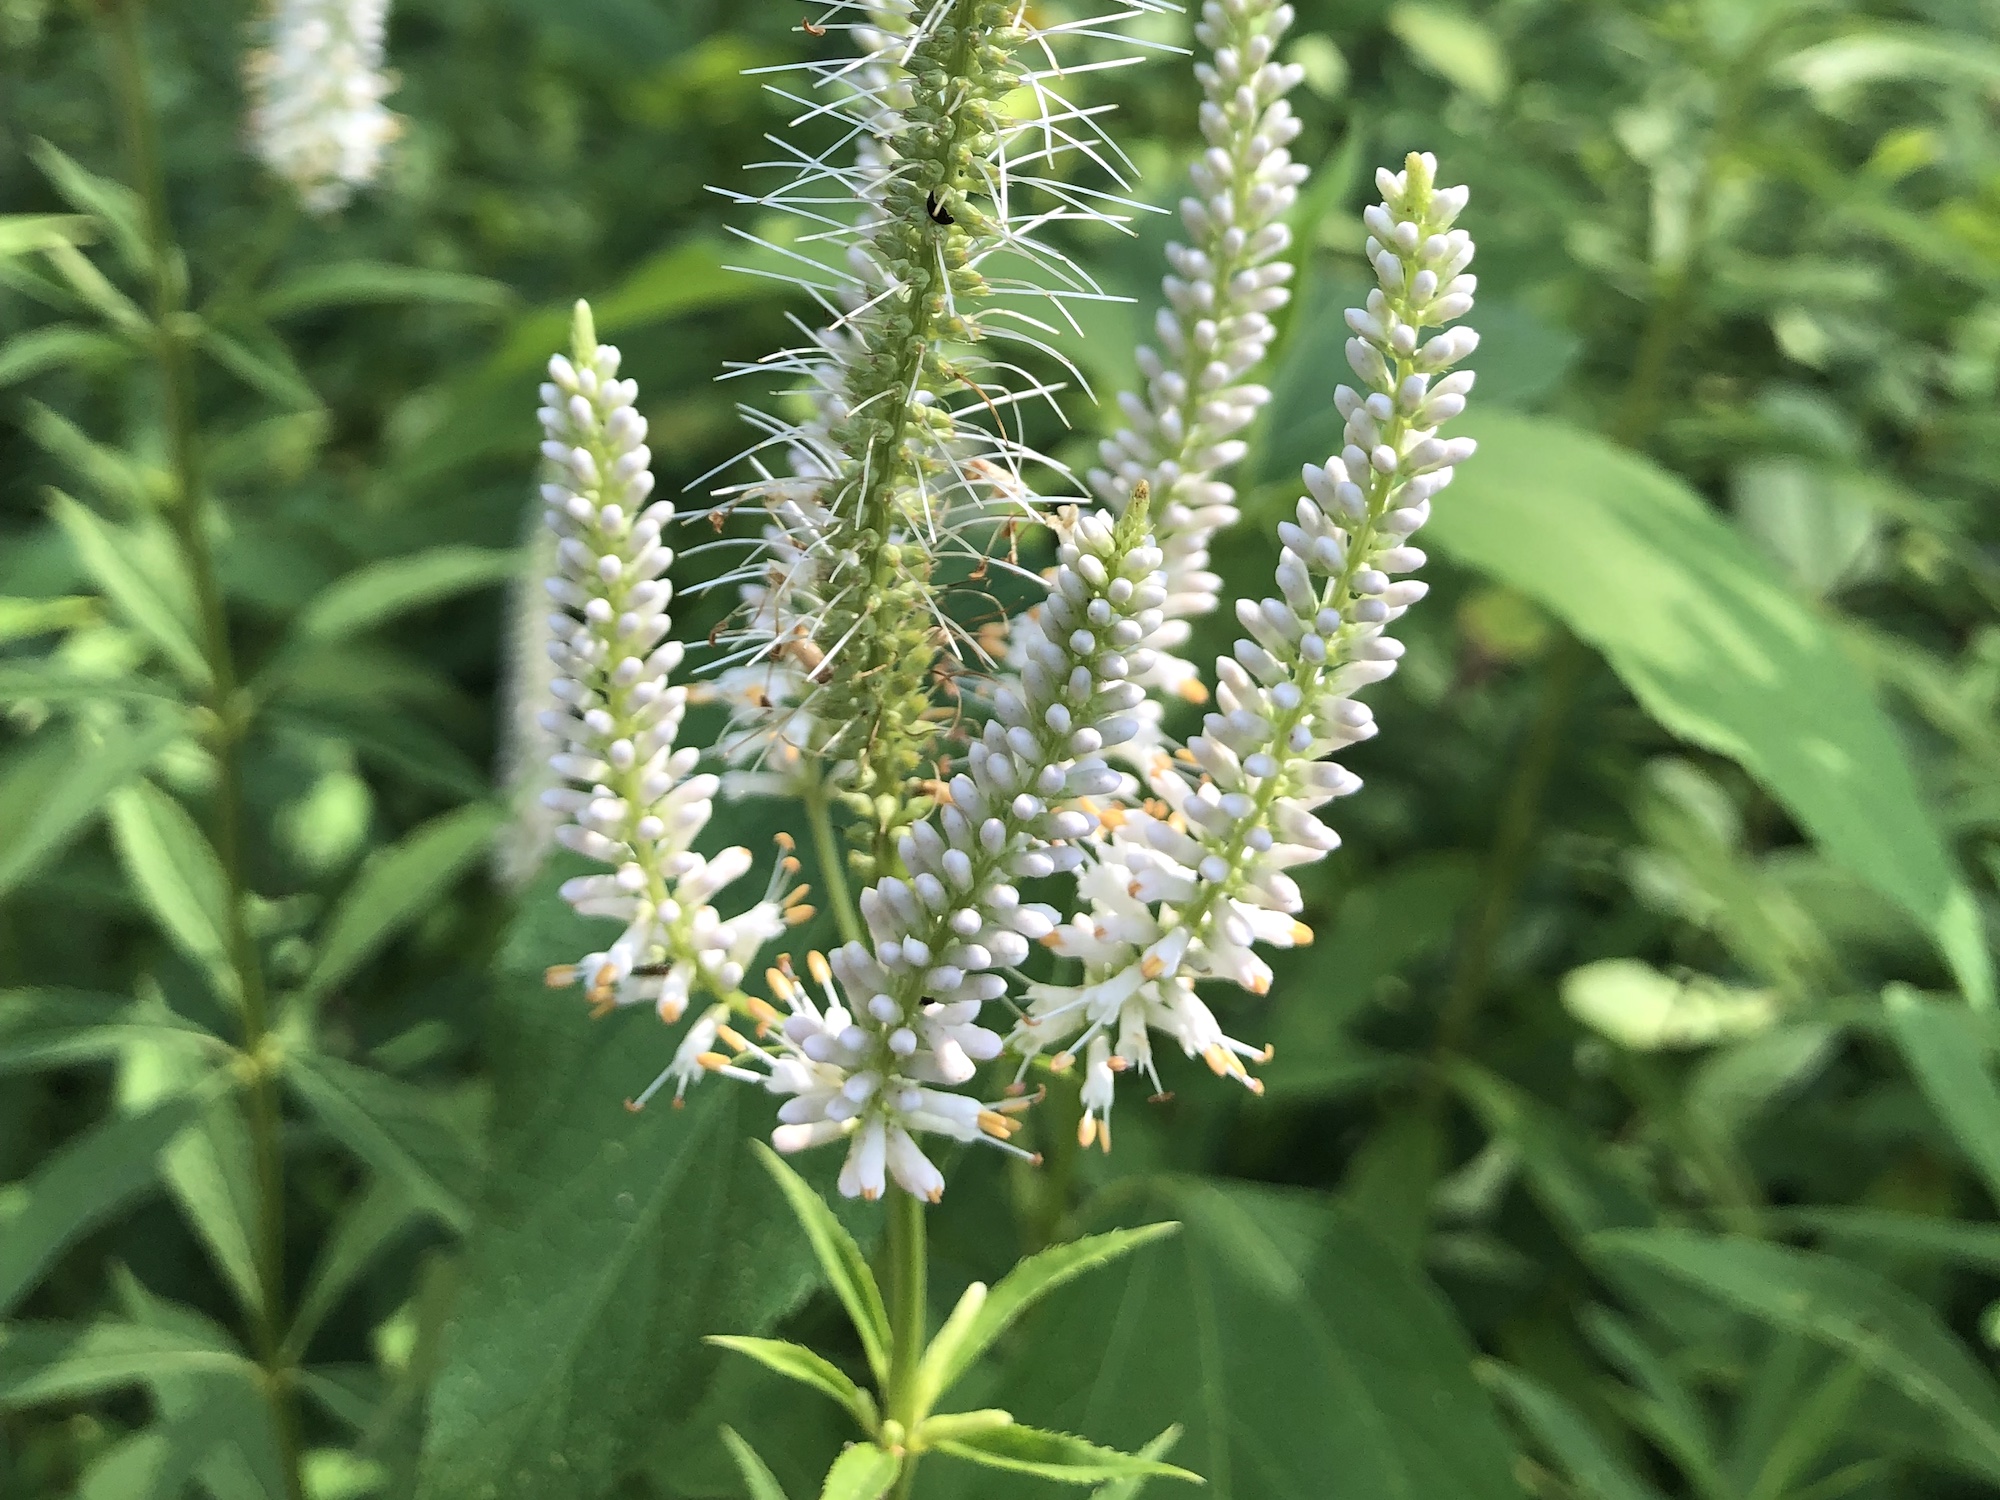 Culver's Root in Oak Savanna in Madison, Wisconsin on July 23, 2019.